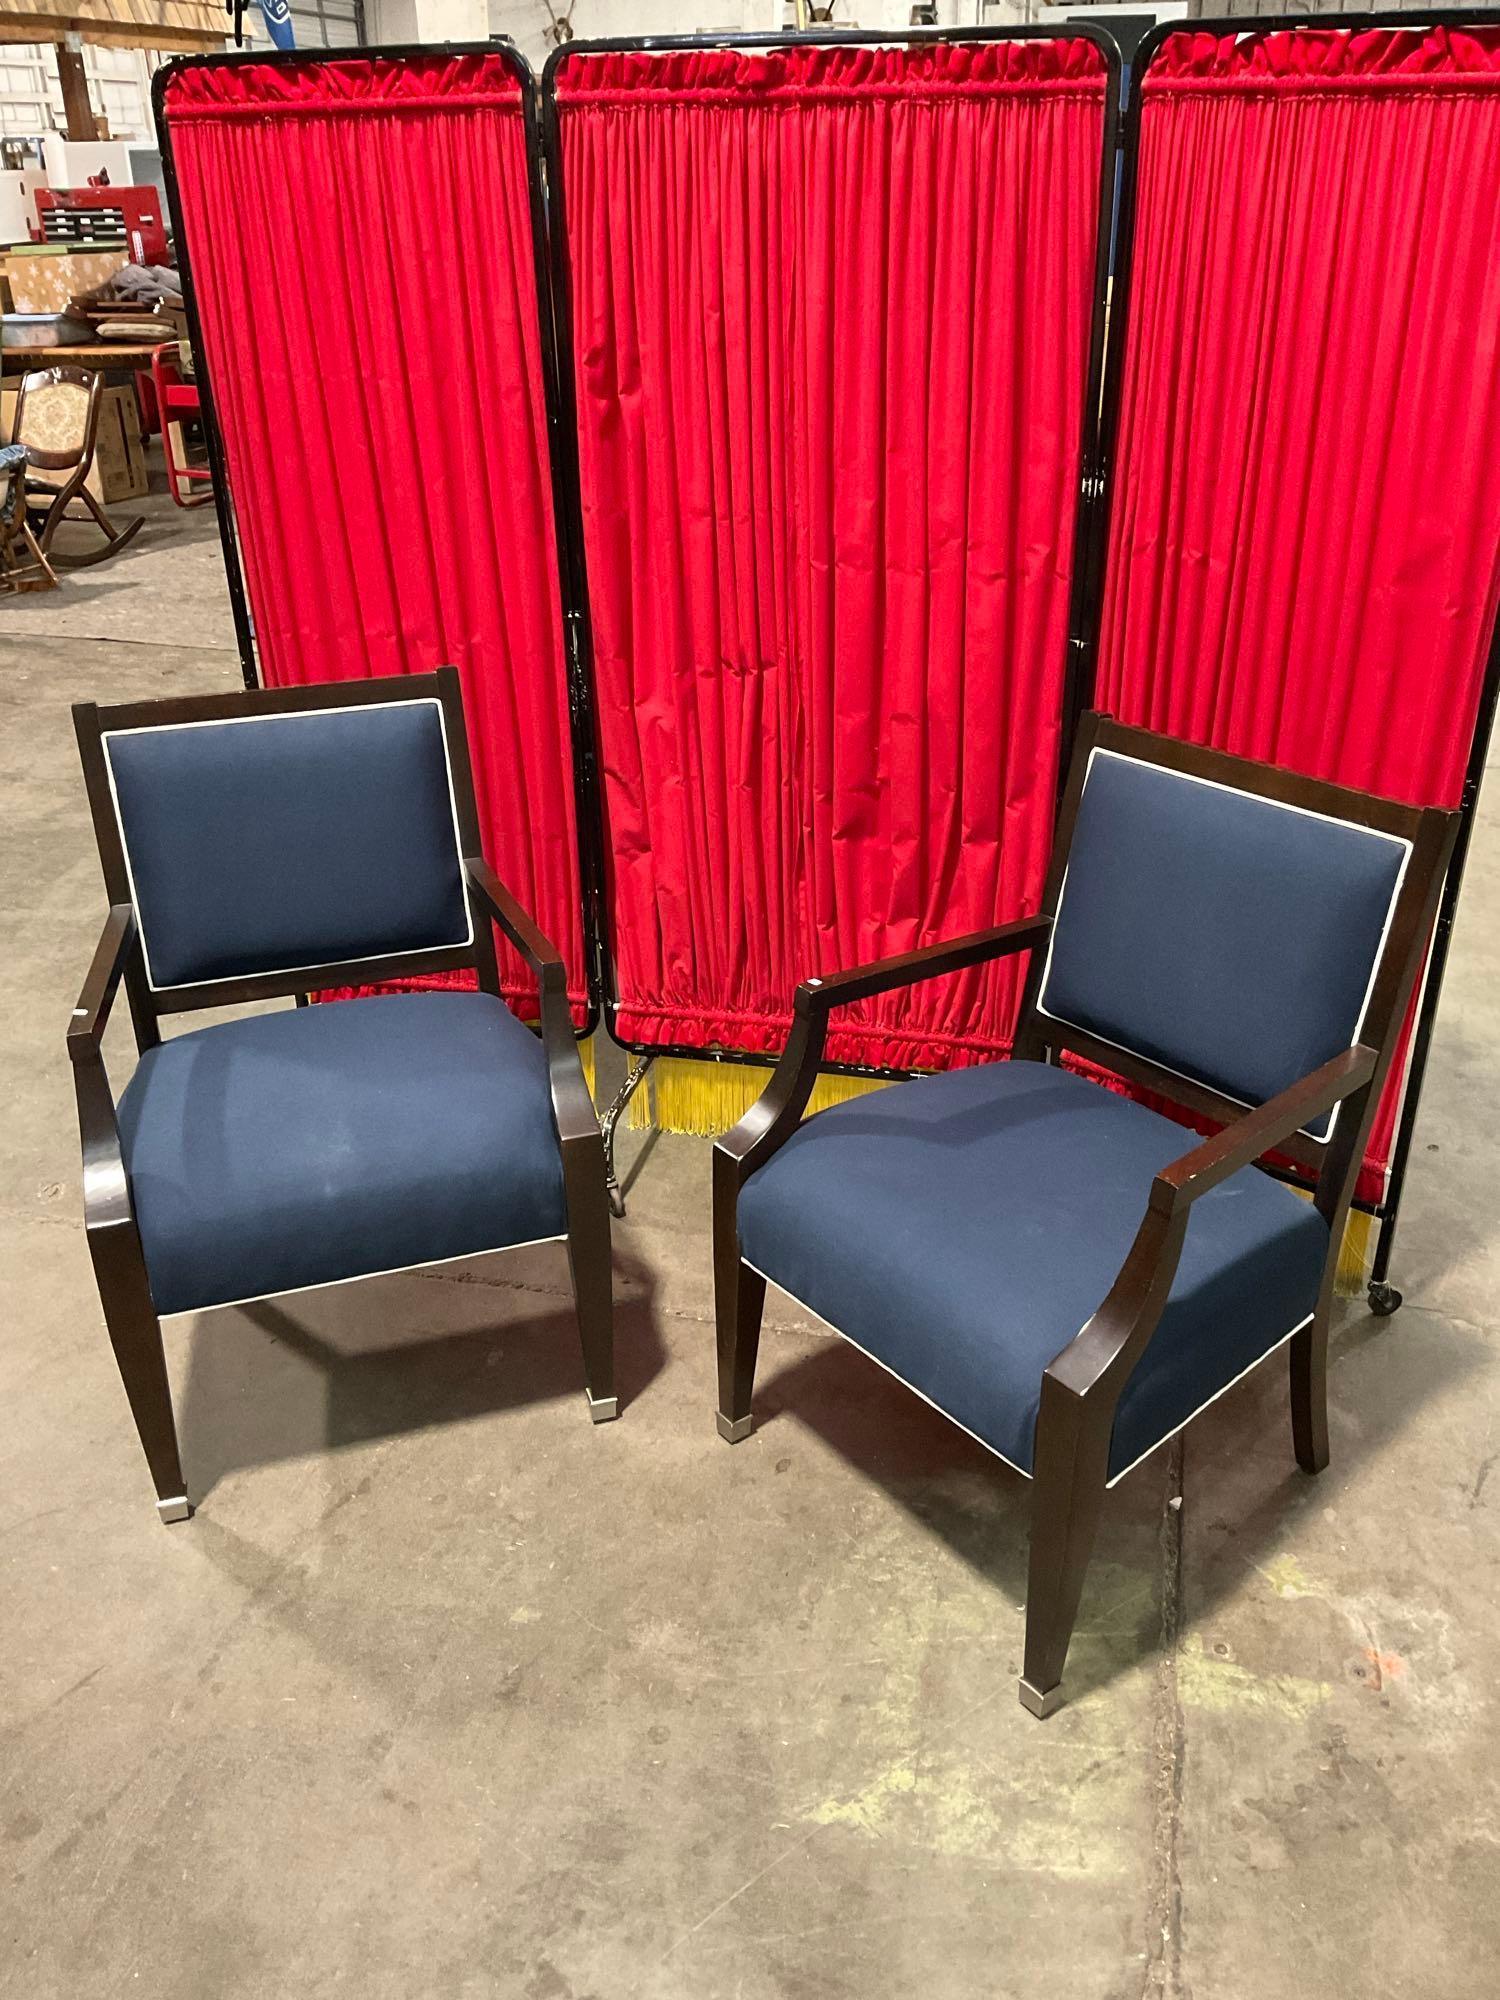 Pair of Nautica Home Wooden Armchairs w/ Navy Blue & White Upholstery & Silver Capped Feet. See